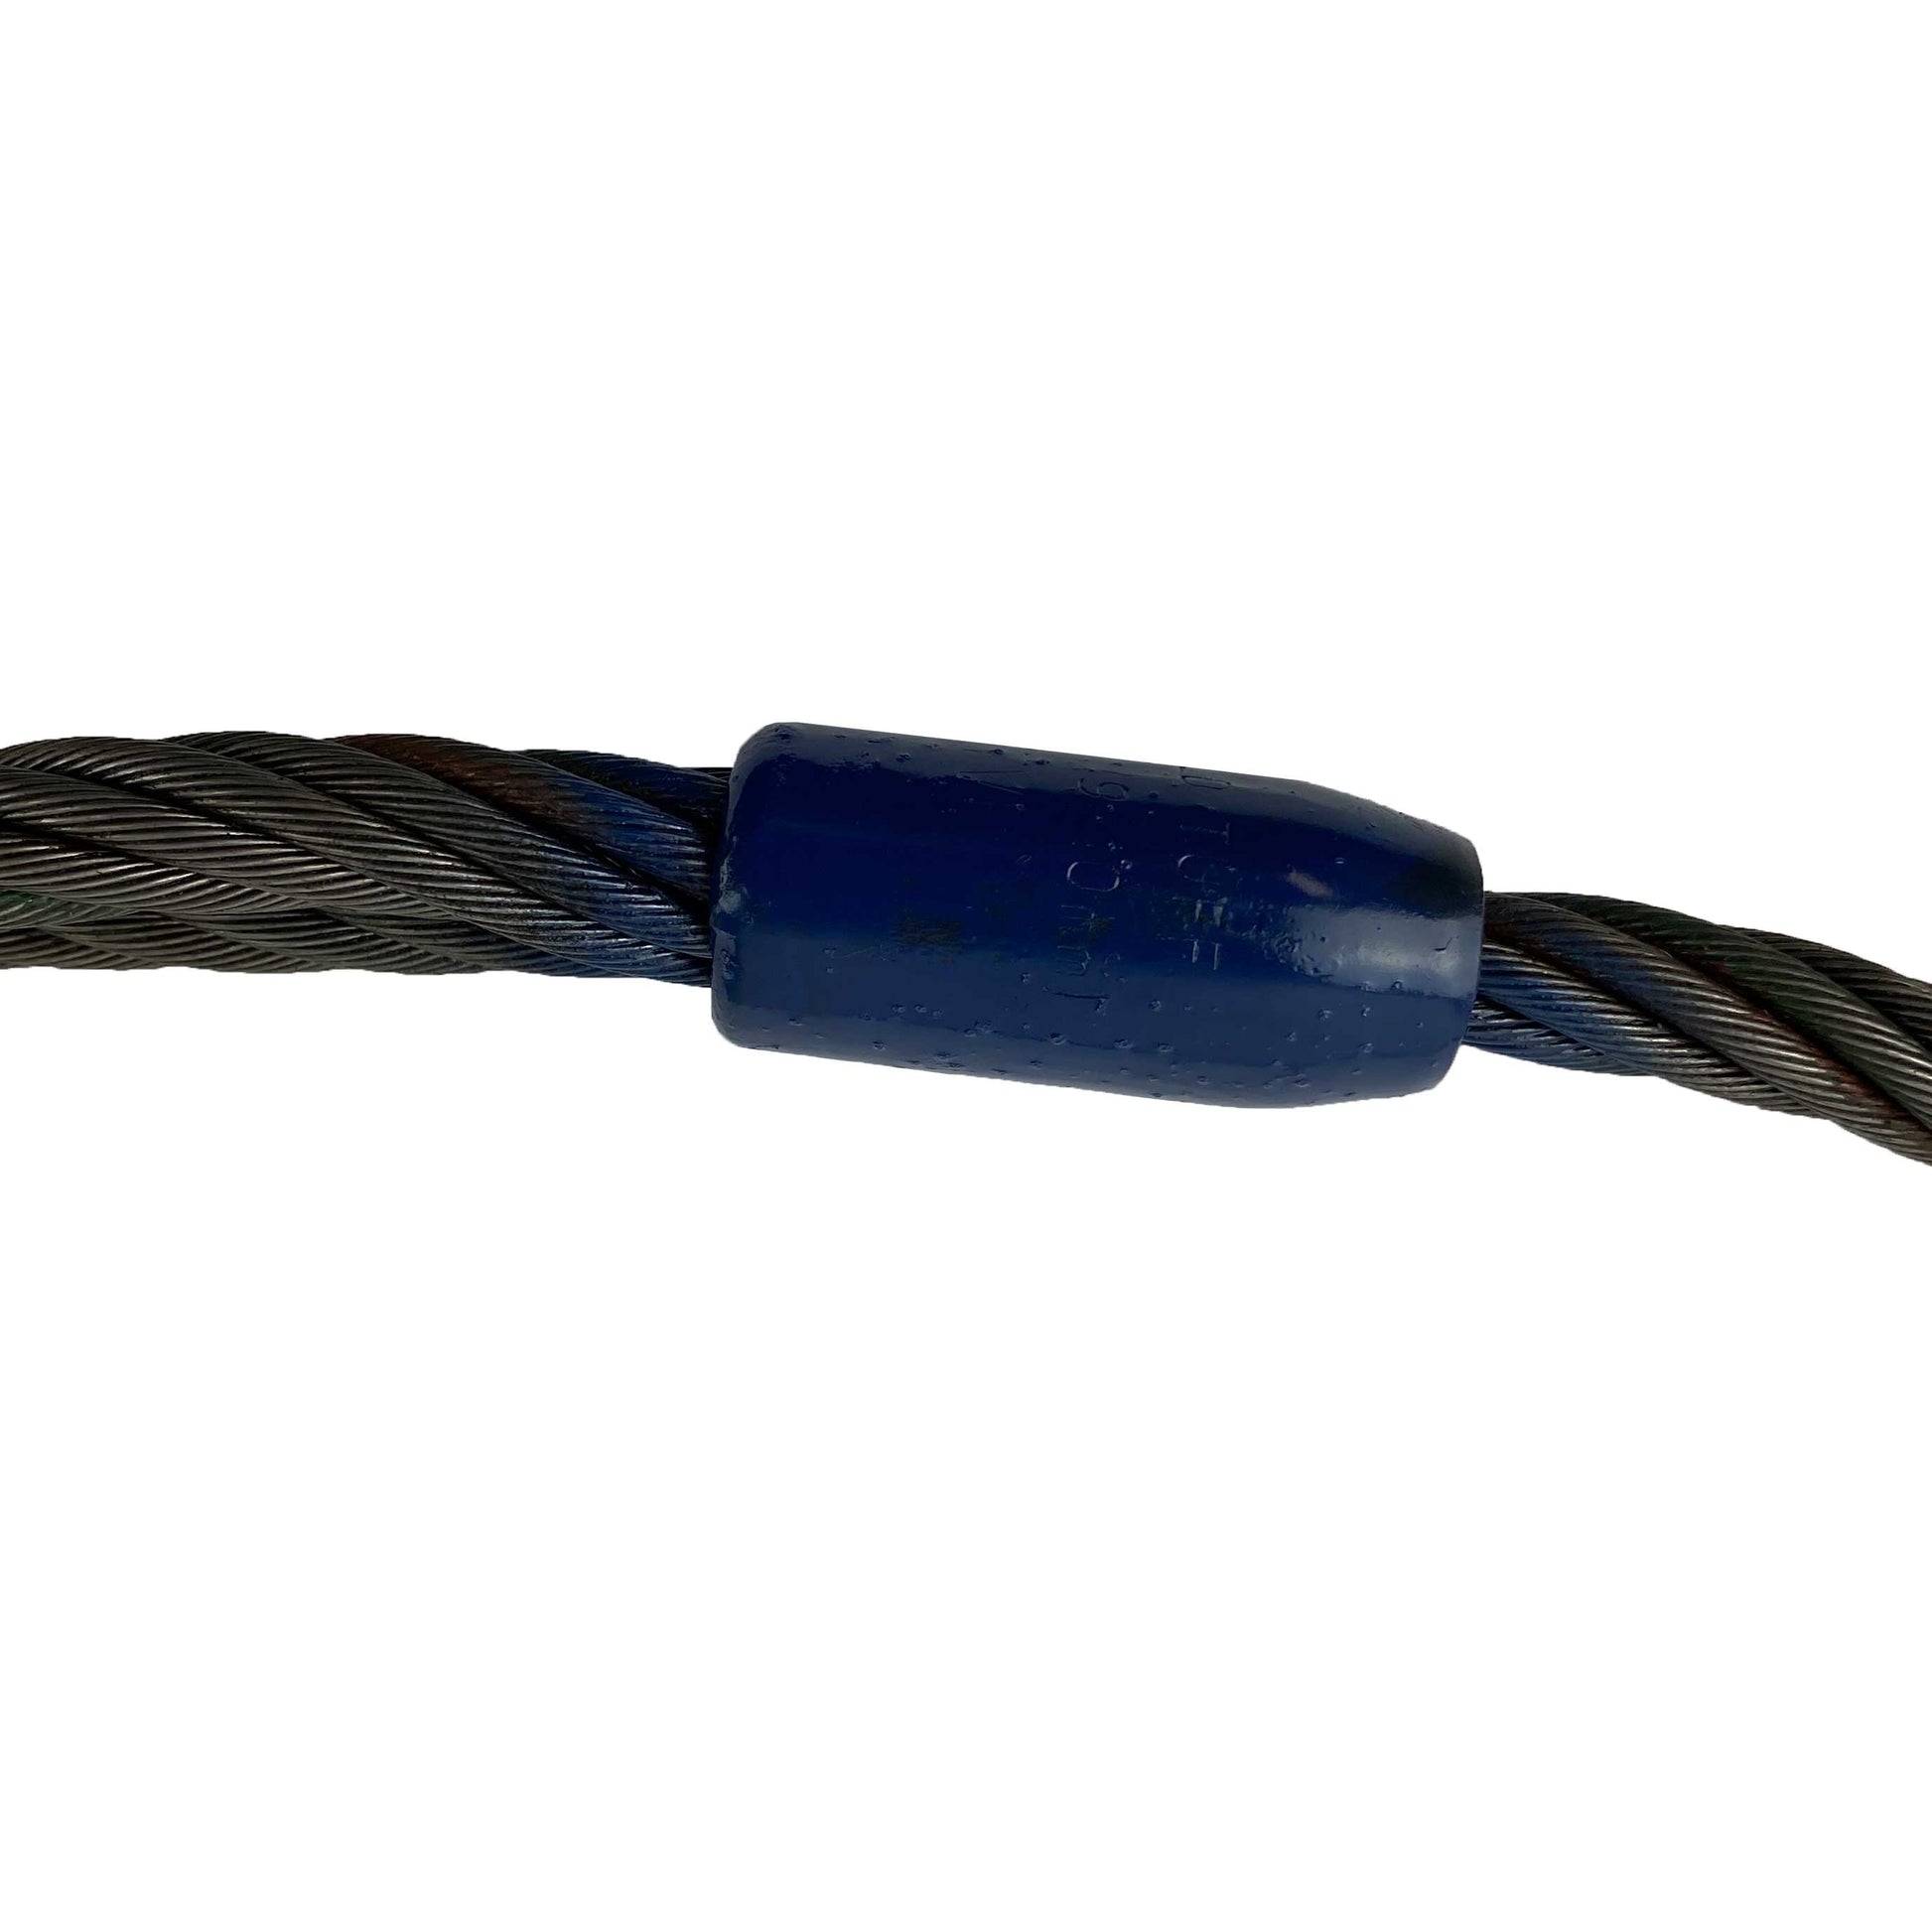 114 inch x 20 foot Mechanical Splice Grommet Wire Rope Sling image 4 of 4